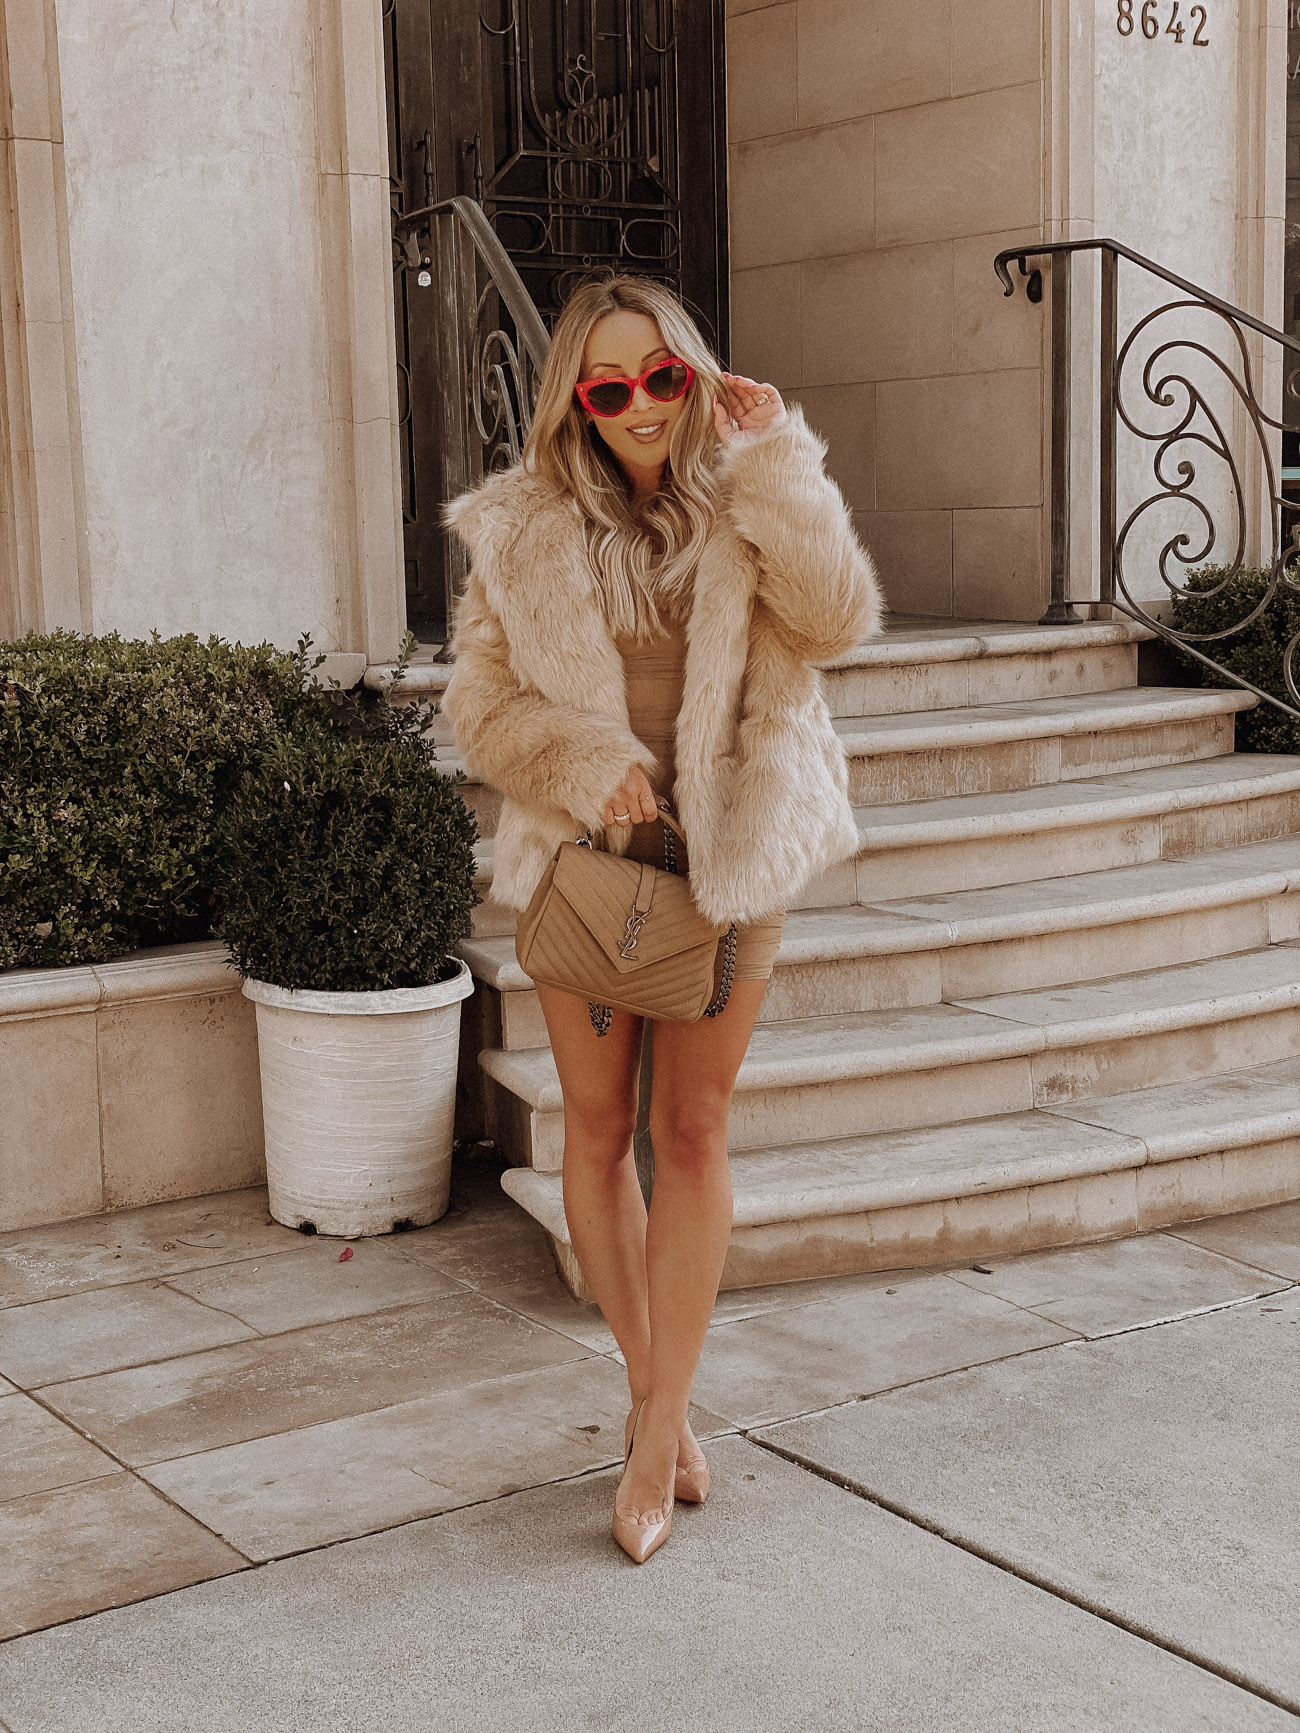 A Red Statement | Faux Fur Coat | Medium YSL College Bag | Nude Louboutins | Blondie in the City by Hayley Larue